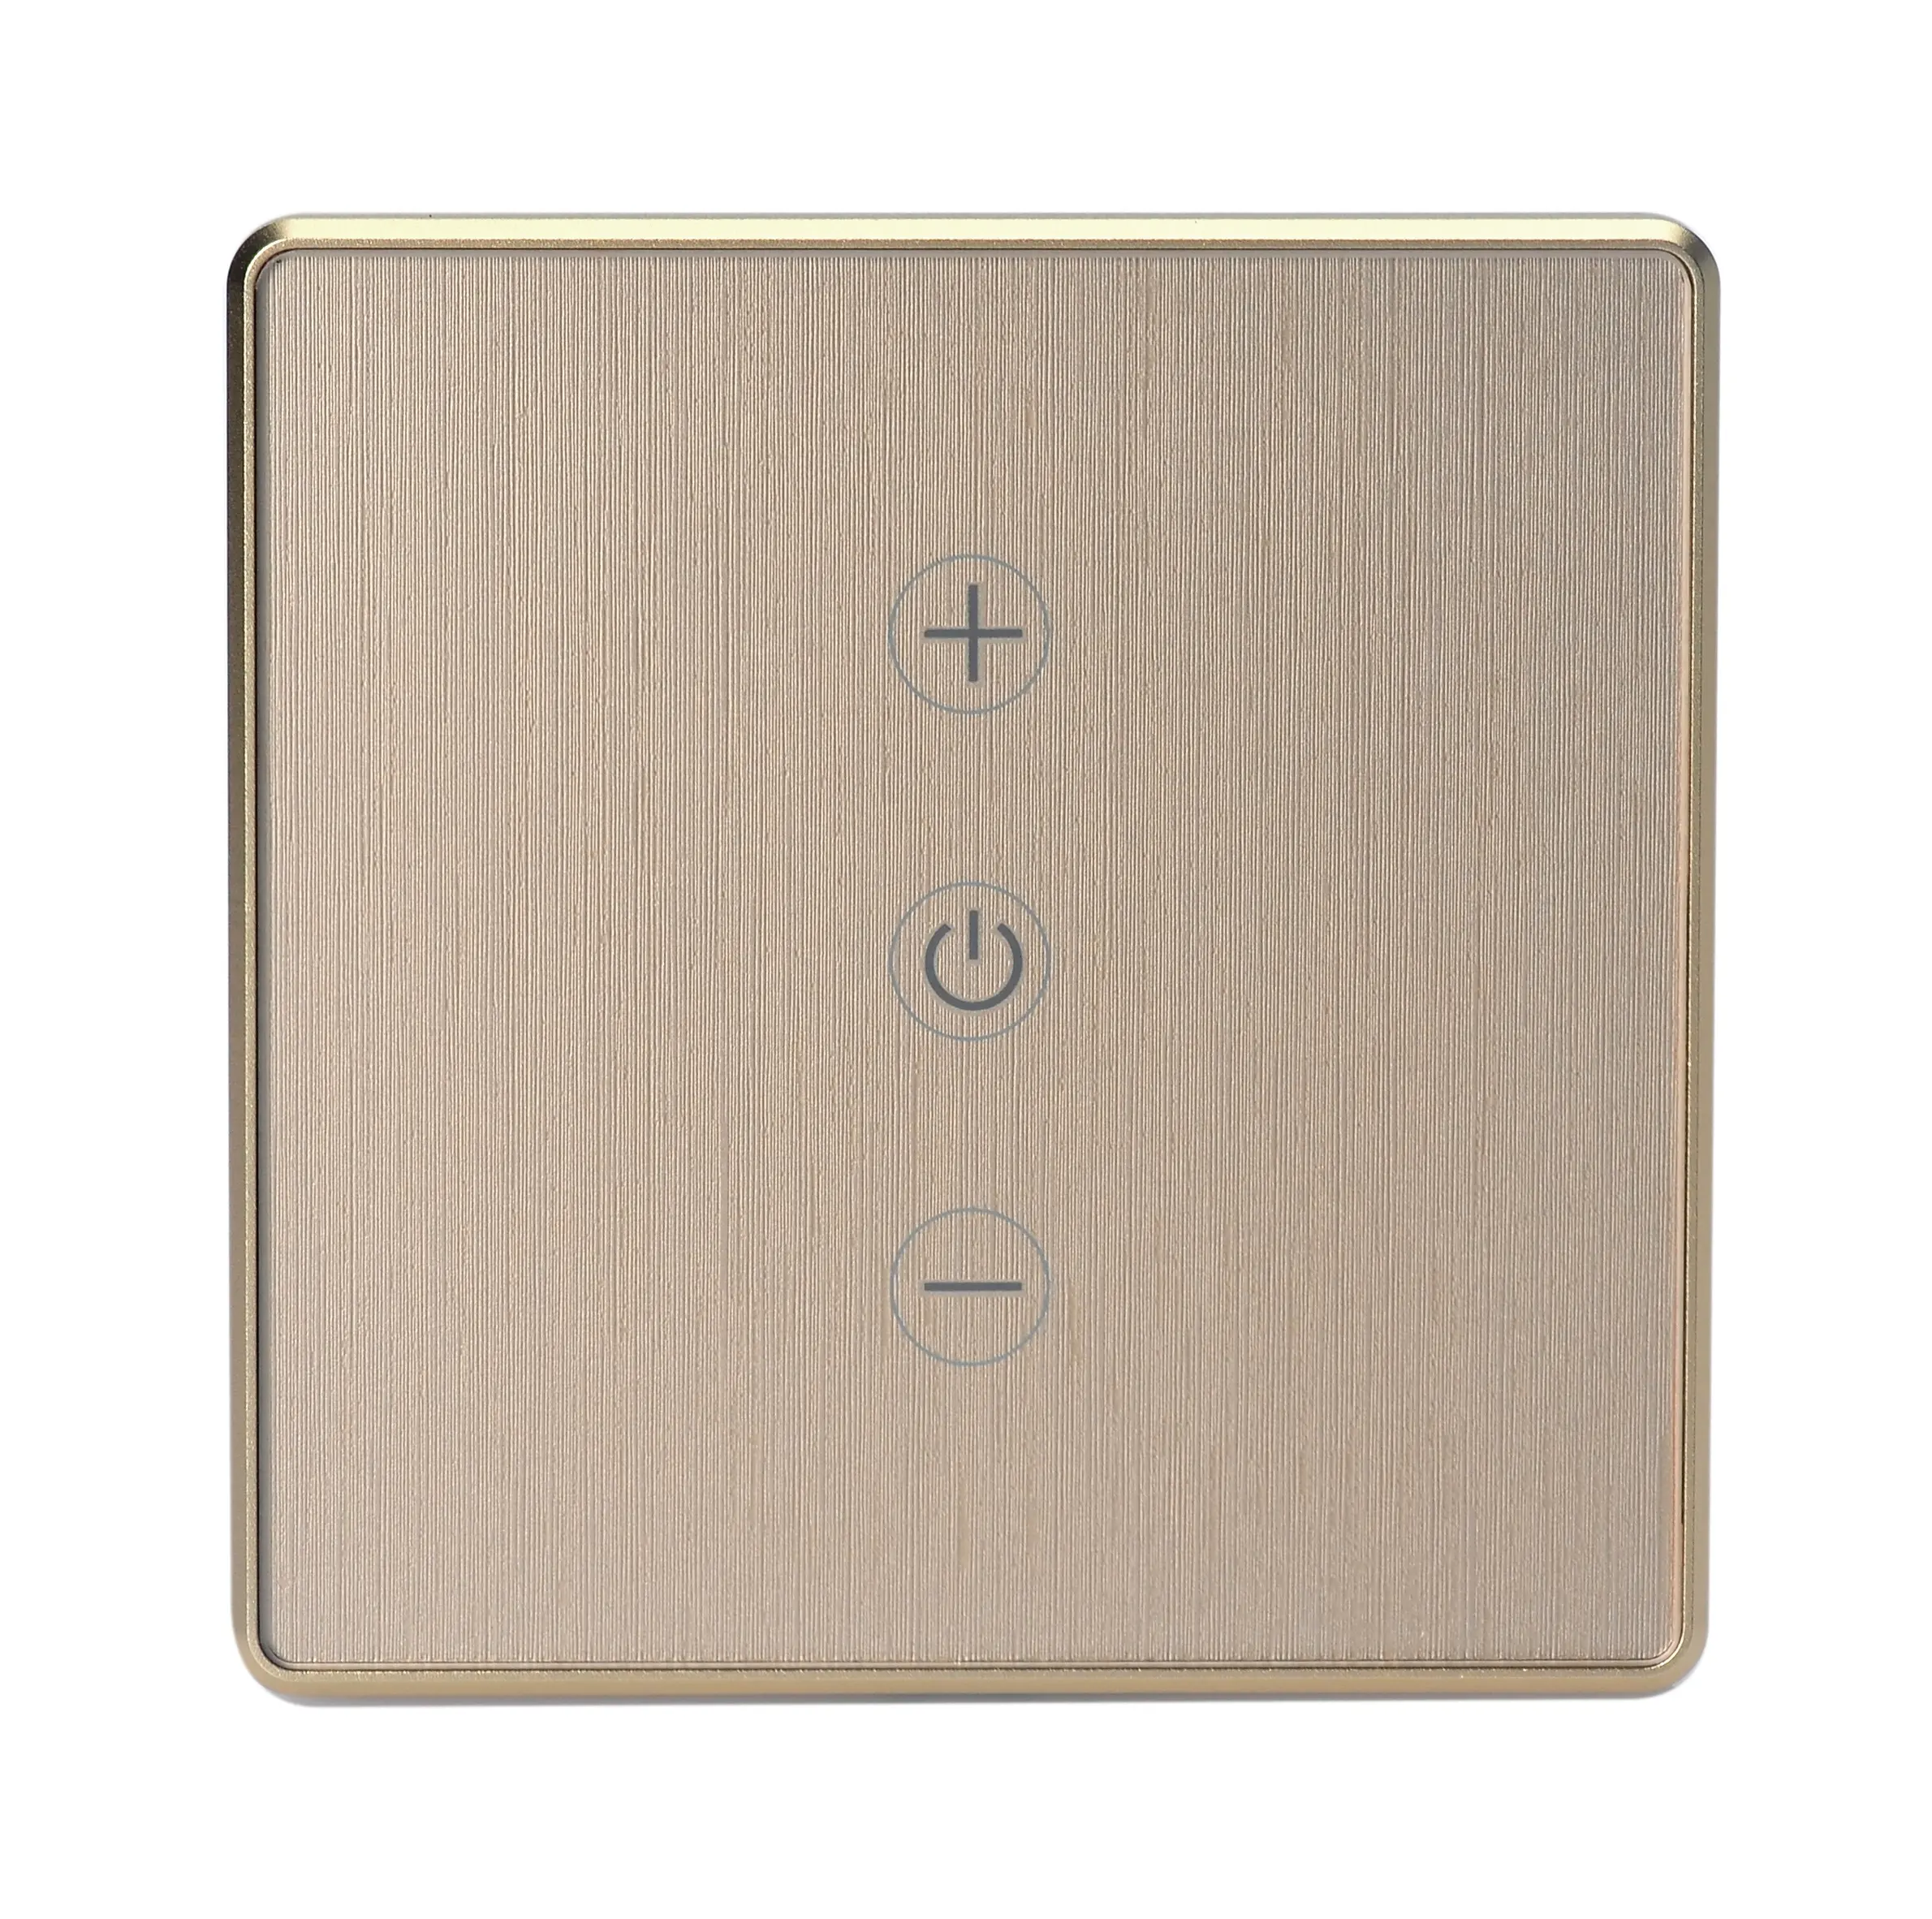 Mobile Remote Control Smart Life UK EU 86ミリメートルMetalフレームSmart Wi-Fi Touch Wall Dimmer Switch